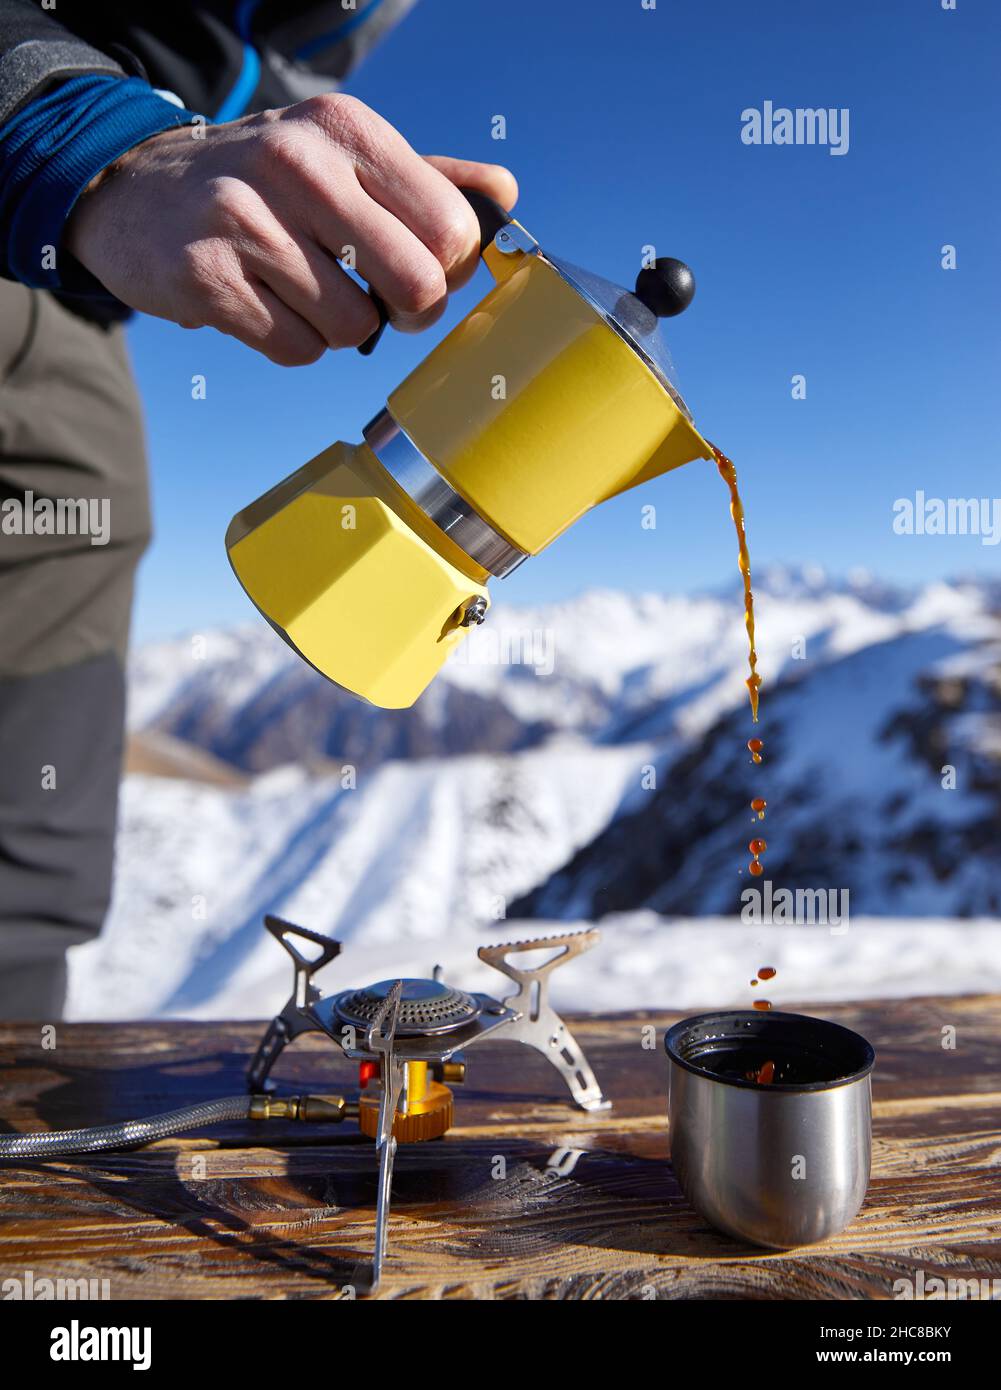 https://c8.alamy.com/comp/2HC8BKY/man-hiker-pouring-coffee-from-yellow-moka-mocha-pot-outdoors-in-the-snow-winter-mountains-old-style-coffee-vintage-pot-outdoor-camping-2HC8BKY.jpg